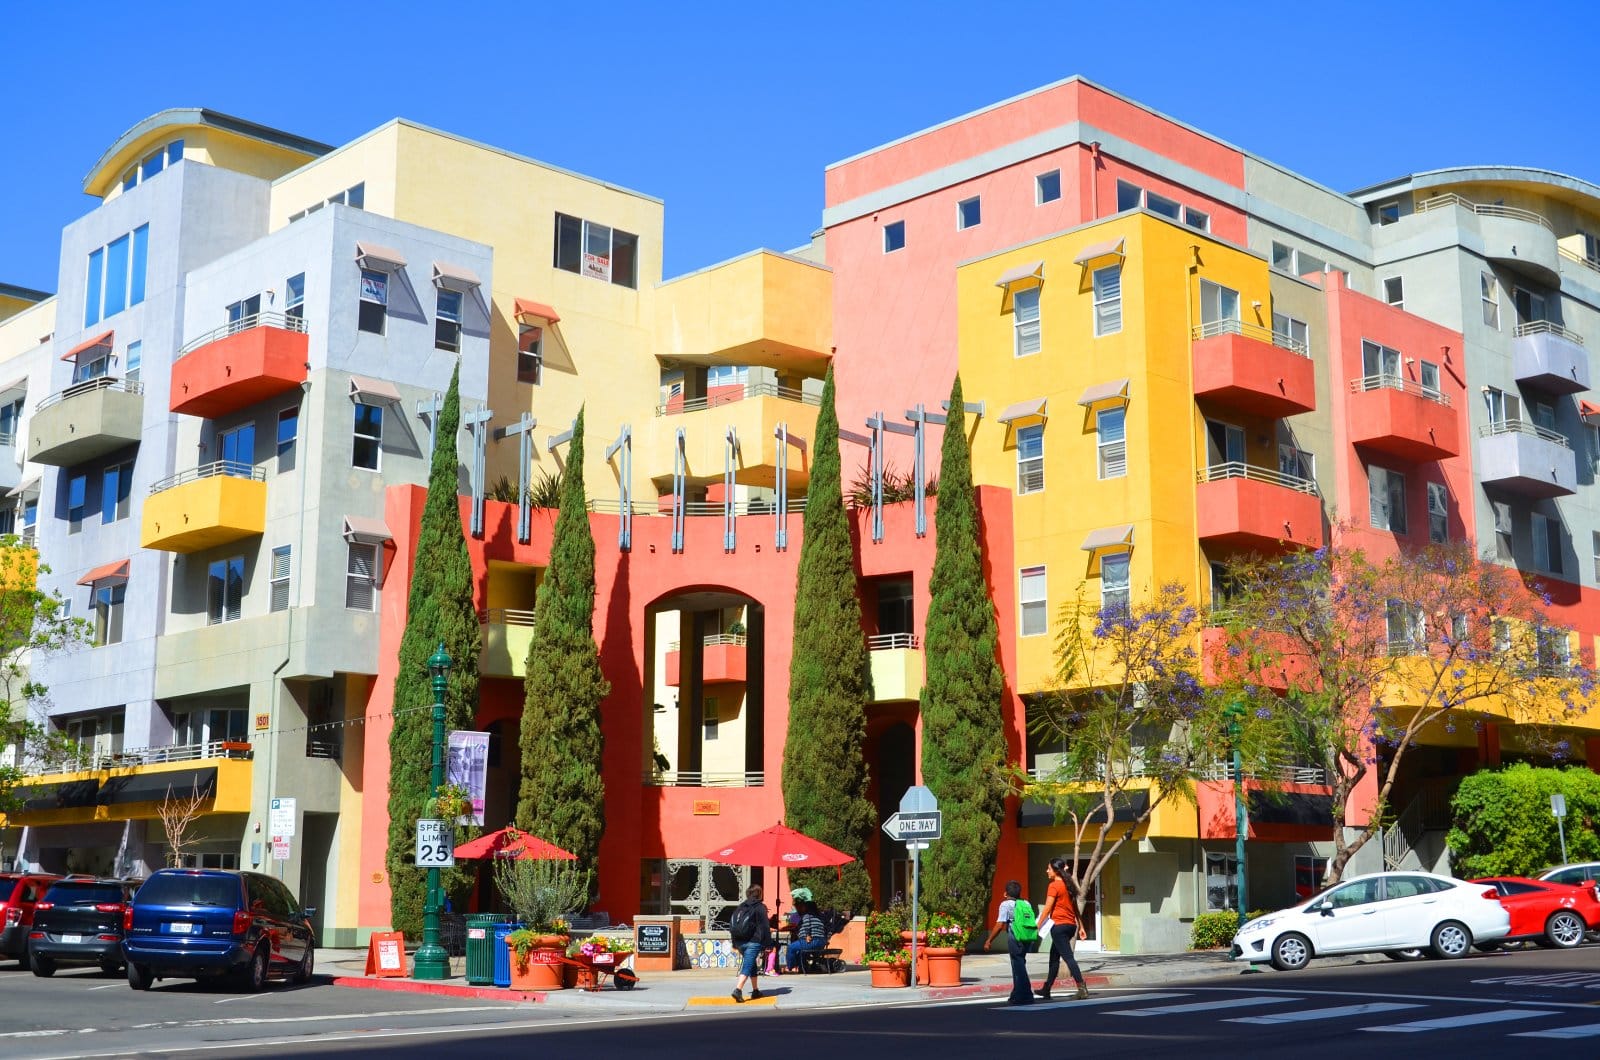 <p>For a 400 sq ft studio here, expect to pay about $1,900. Little Italy offers a charming blend of cultural heritage and modern living, though parking and noise from frequent festivals can be drawbacks.</p>